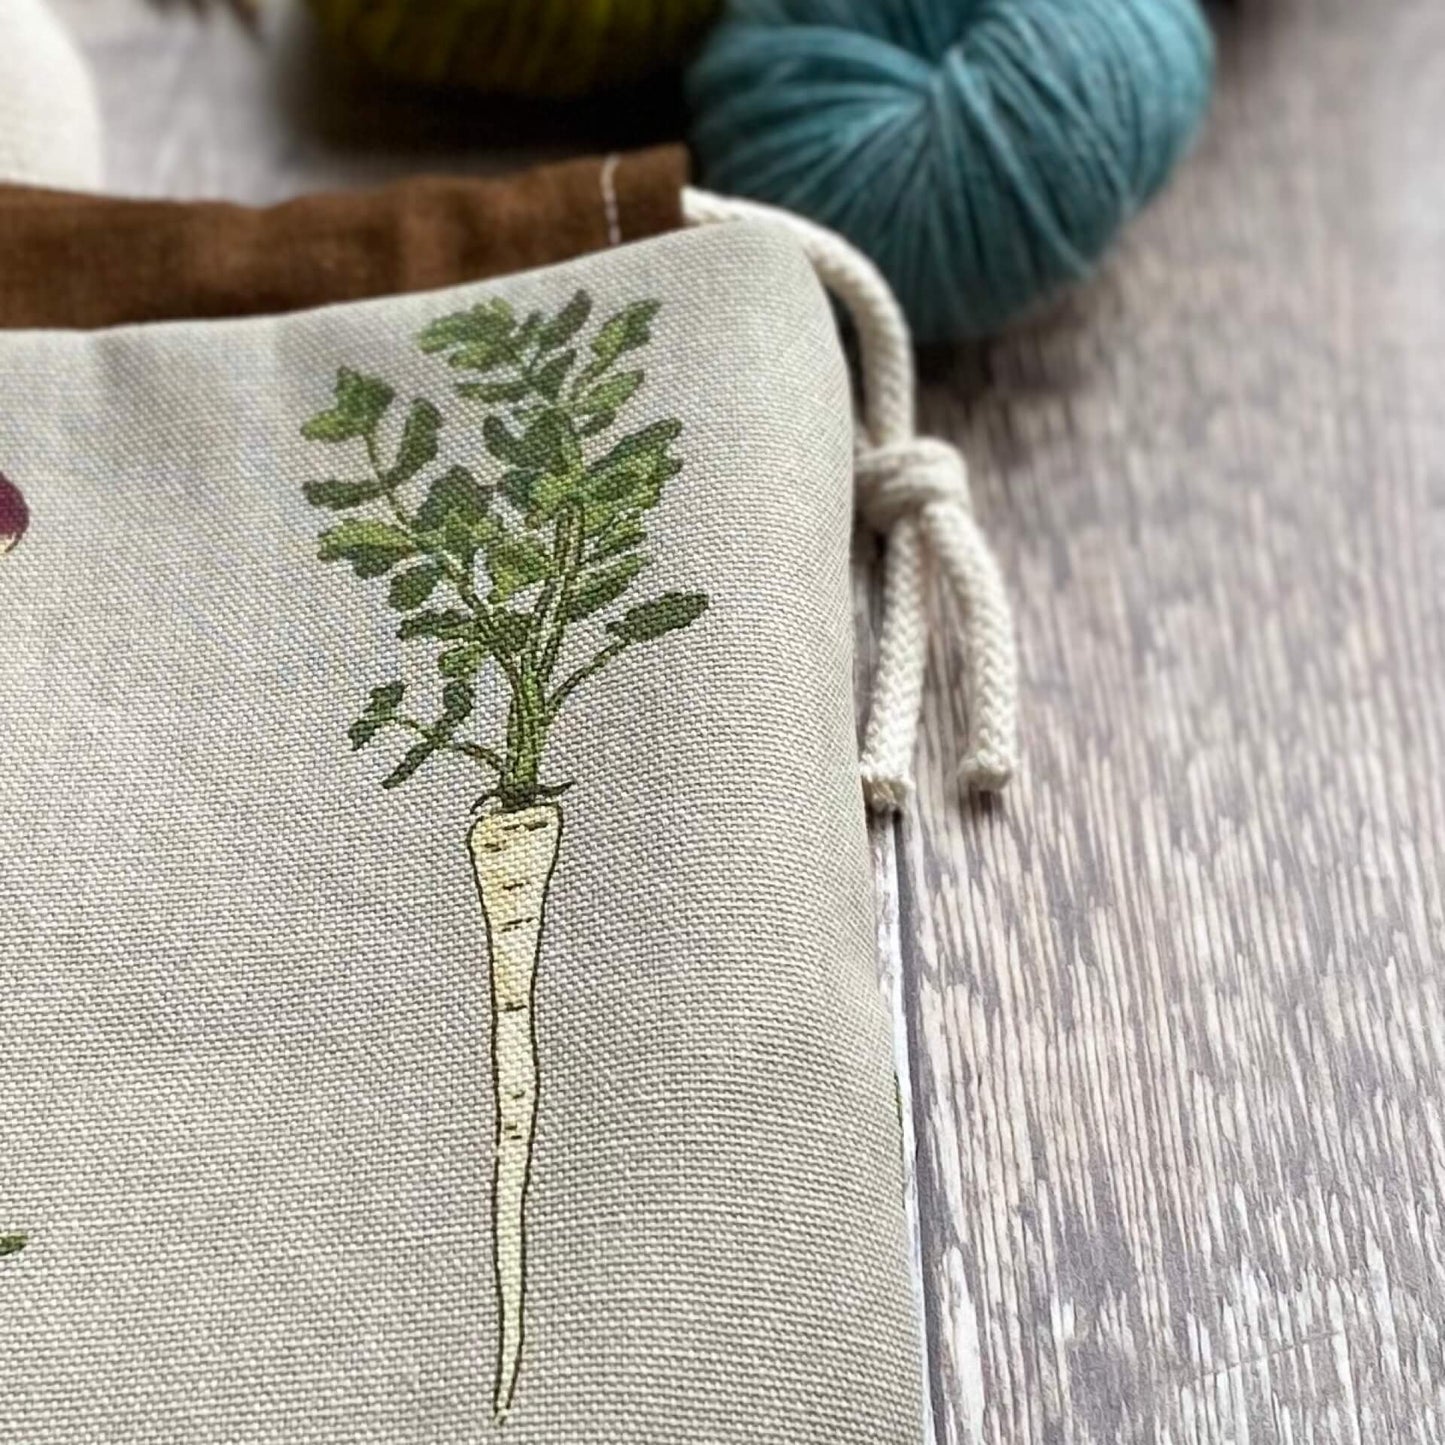 A close up of part of a handmade knitting project bag from the Root Veg collection. The close up shows part of the print in detail - a hand drawn parsnip